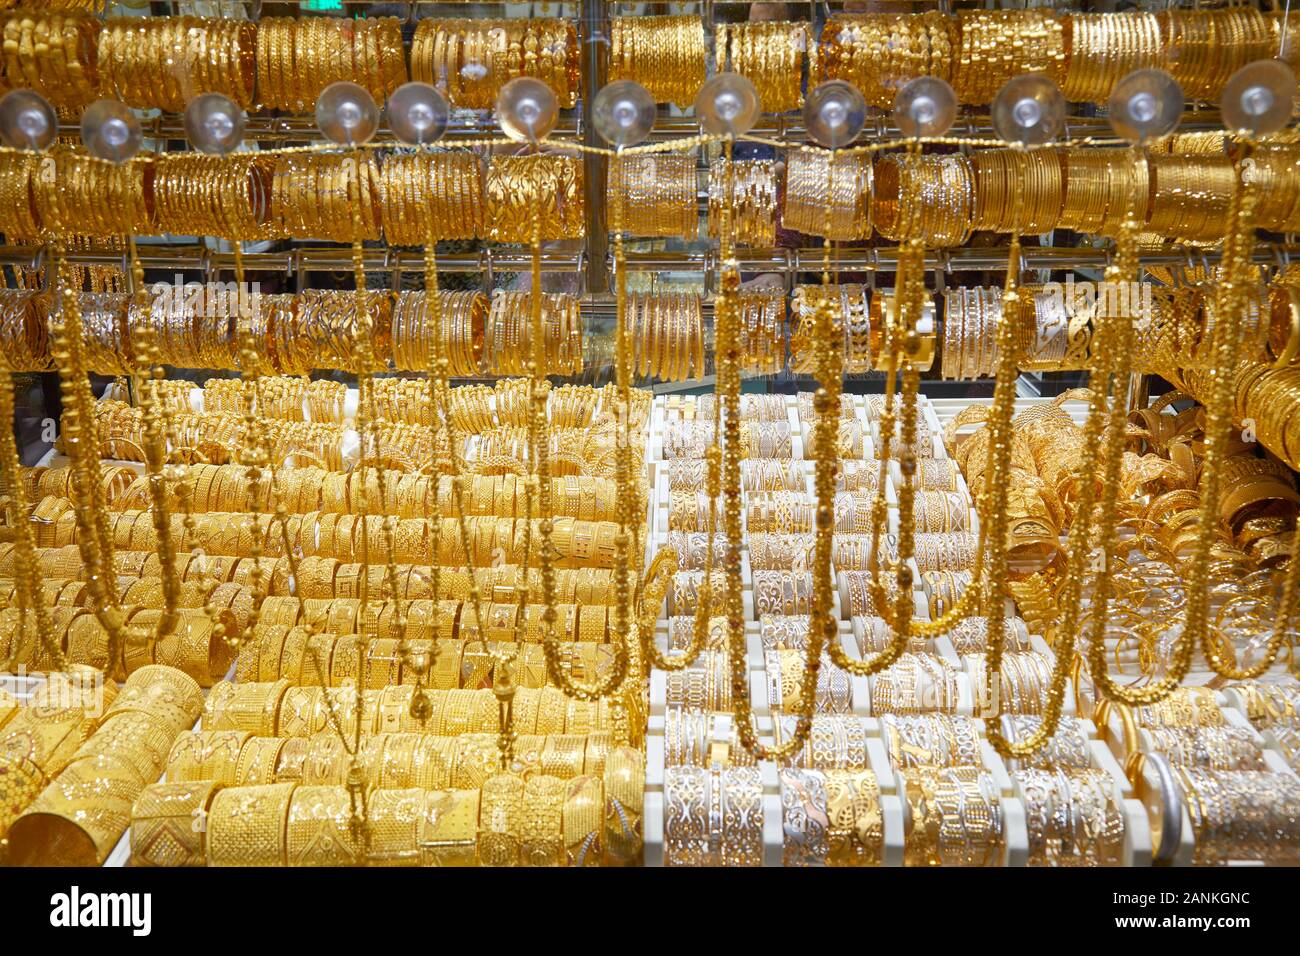 Dubai gold souk market window with jewellery, necklaces, bracelets and luxury accessories Stock Photo